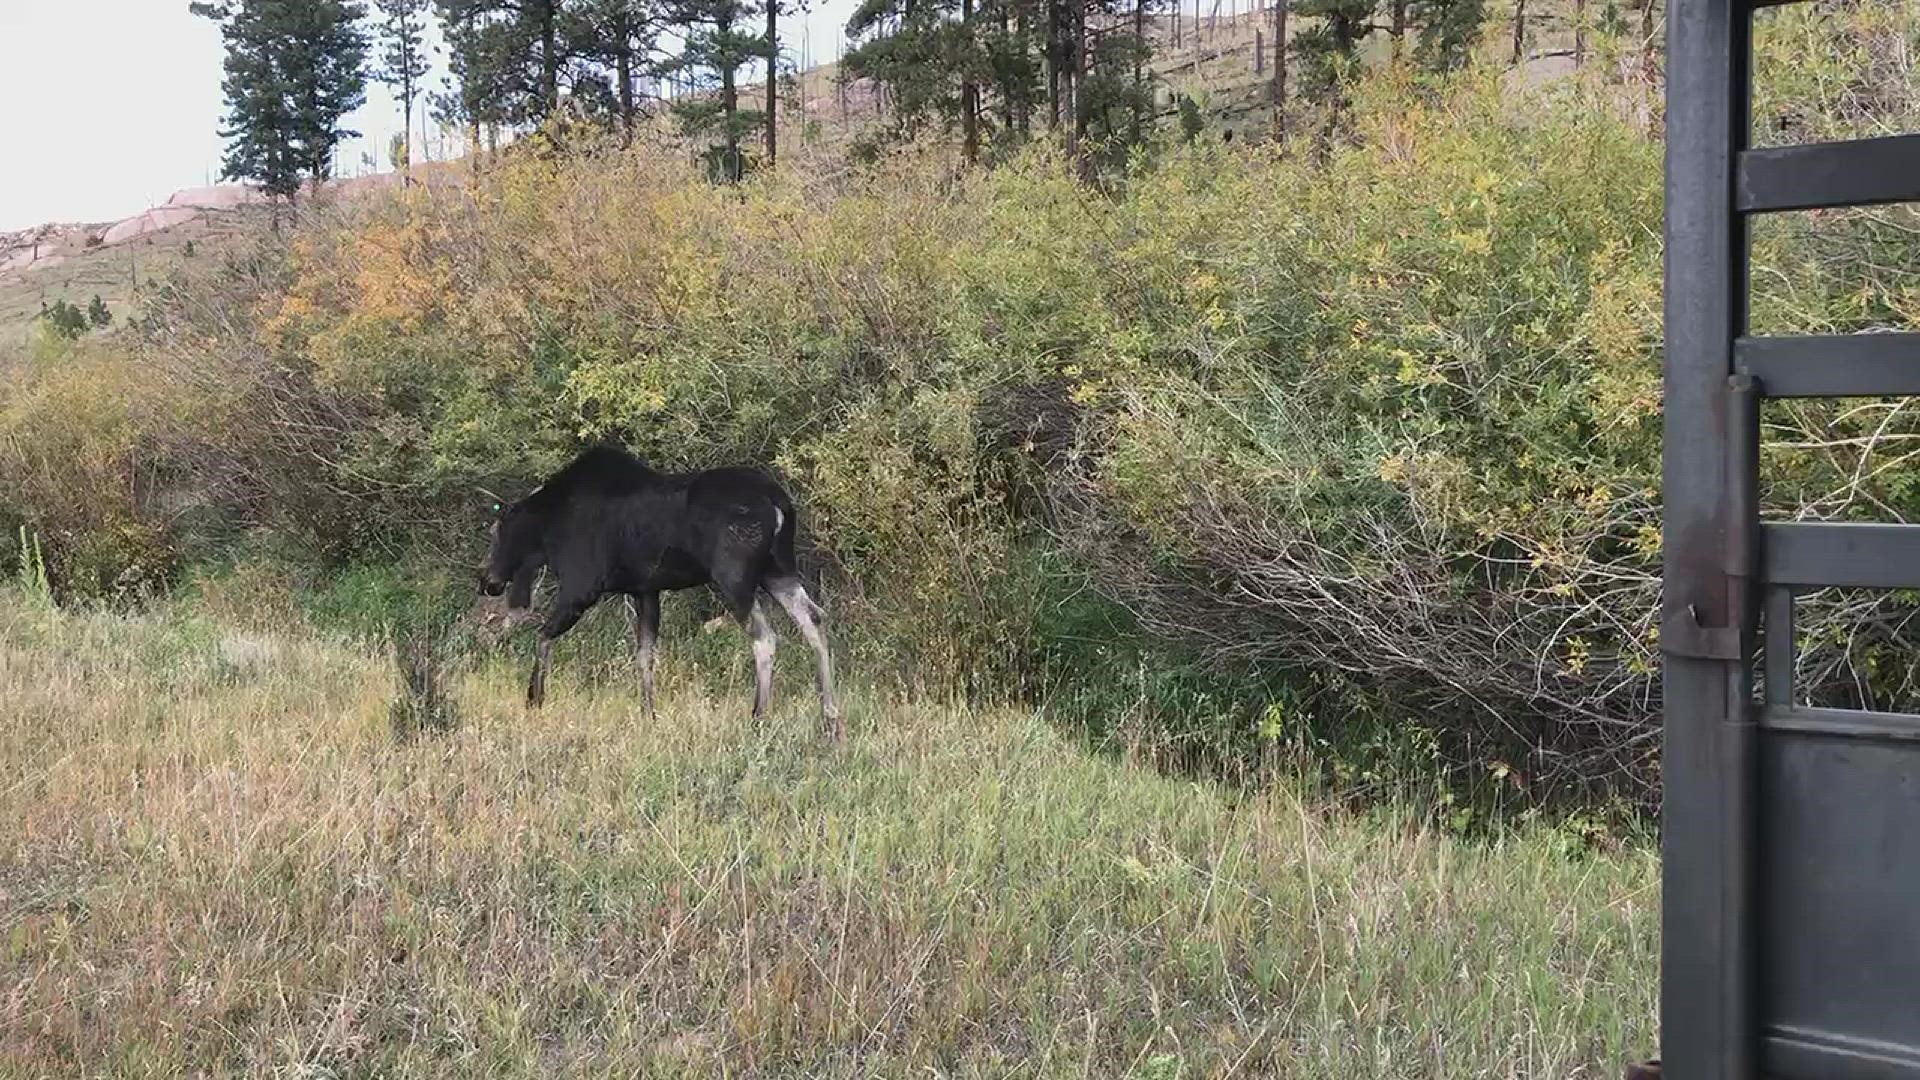 Colorado Parks and Wildlife relocated the young moose from eastern Colorado to the mountains of western Colorado.